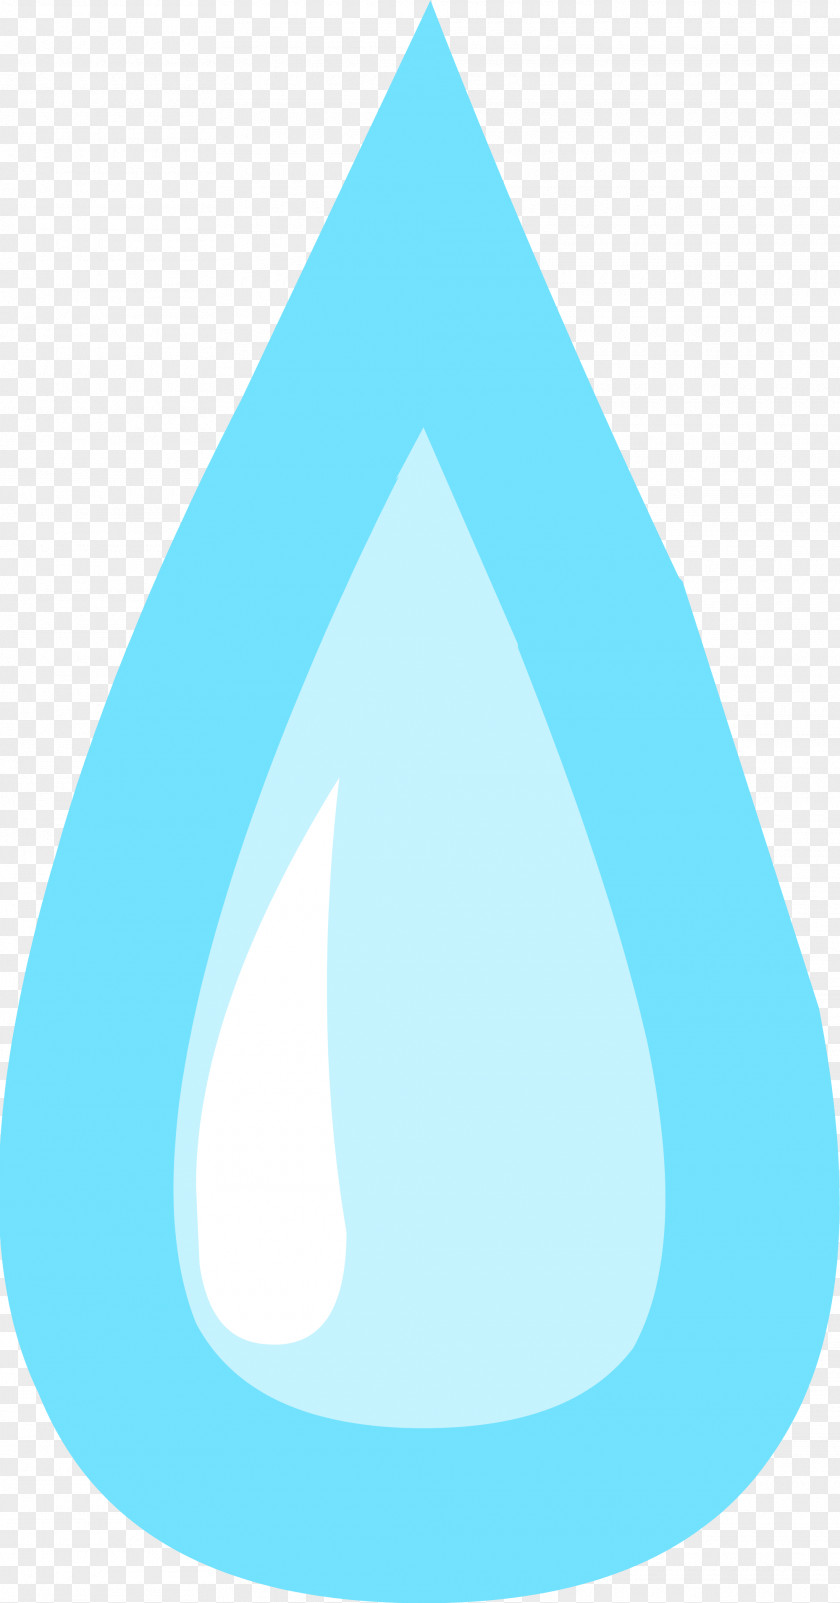 Tears Triangle Teal Turquoise Circle PNG